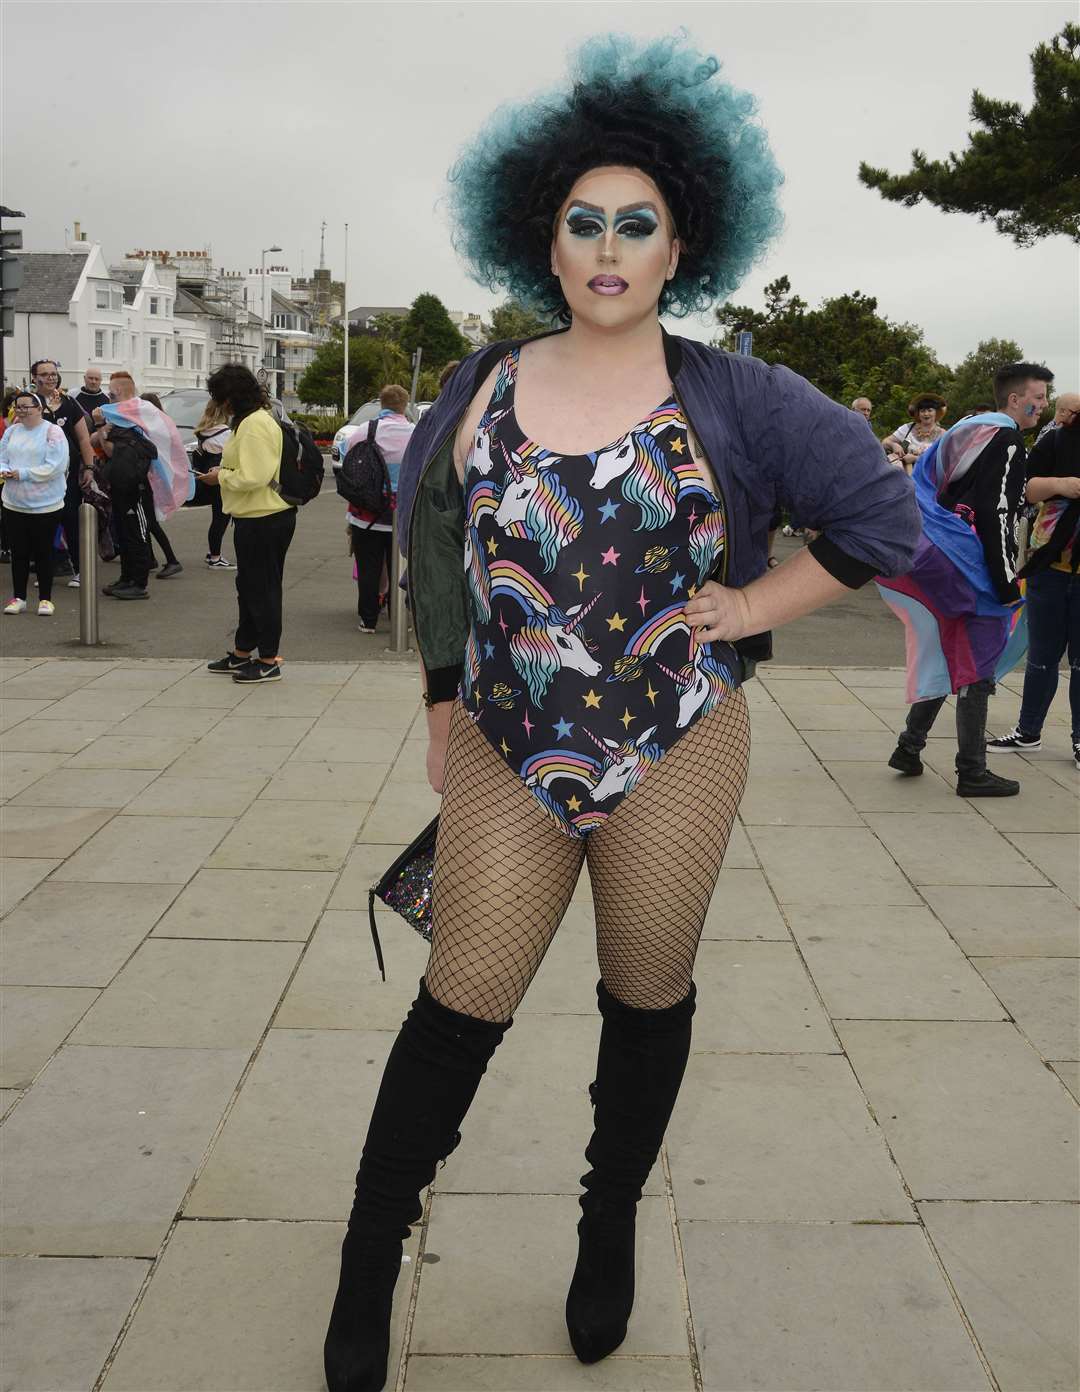 Miss Di Vour at Folkestone Pride 2019. Picture: Paul Amos